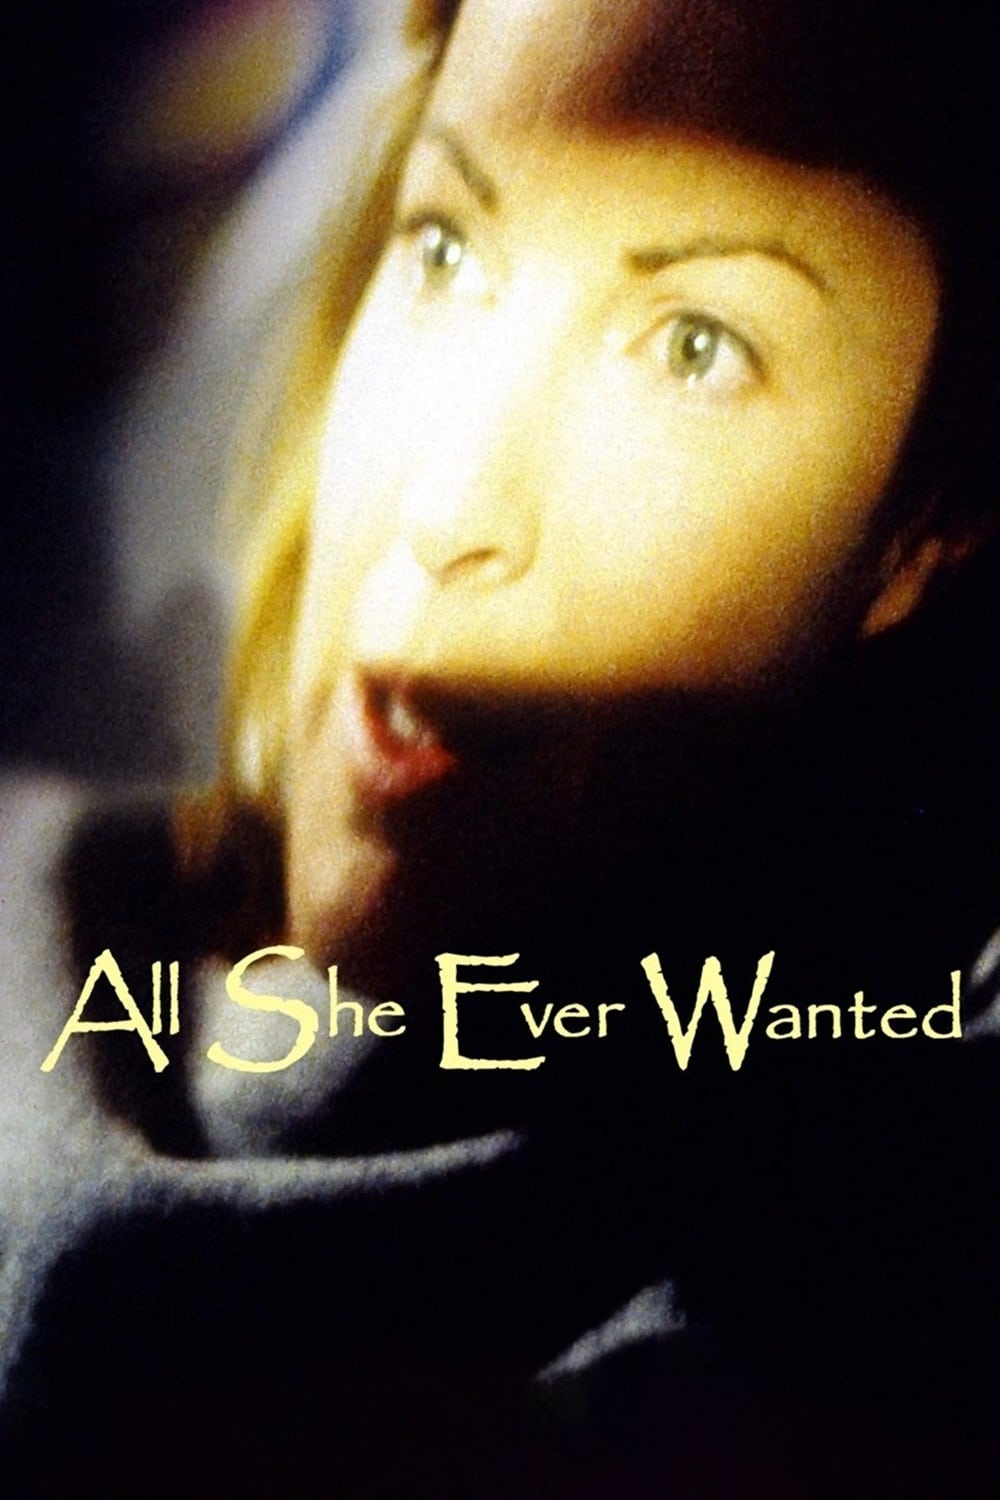 All She Ever Wanted (1996)